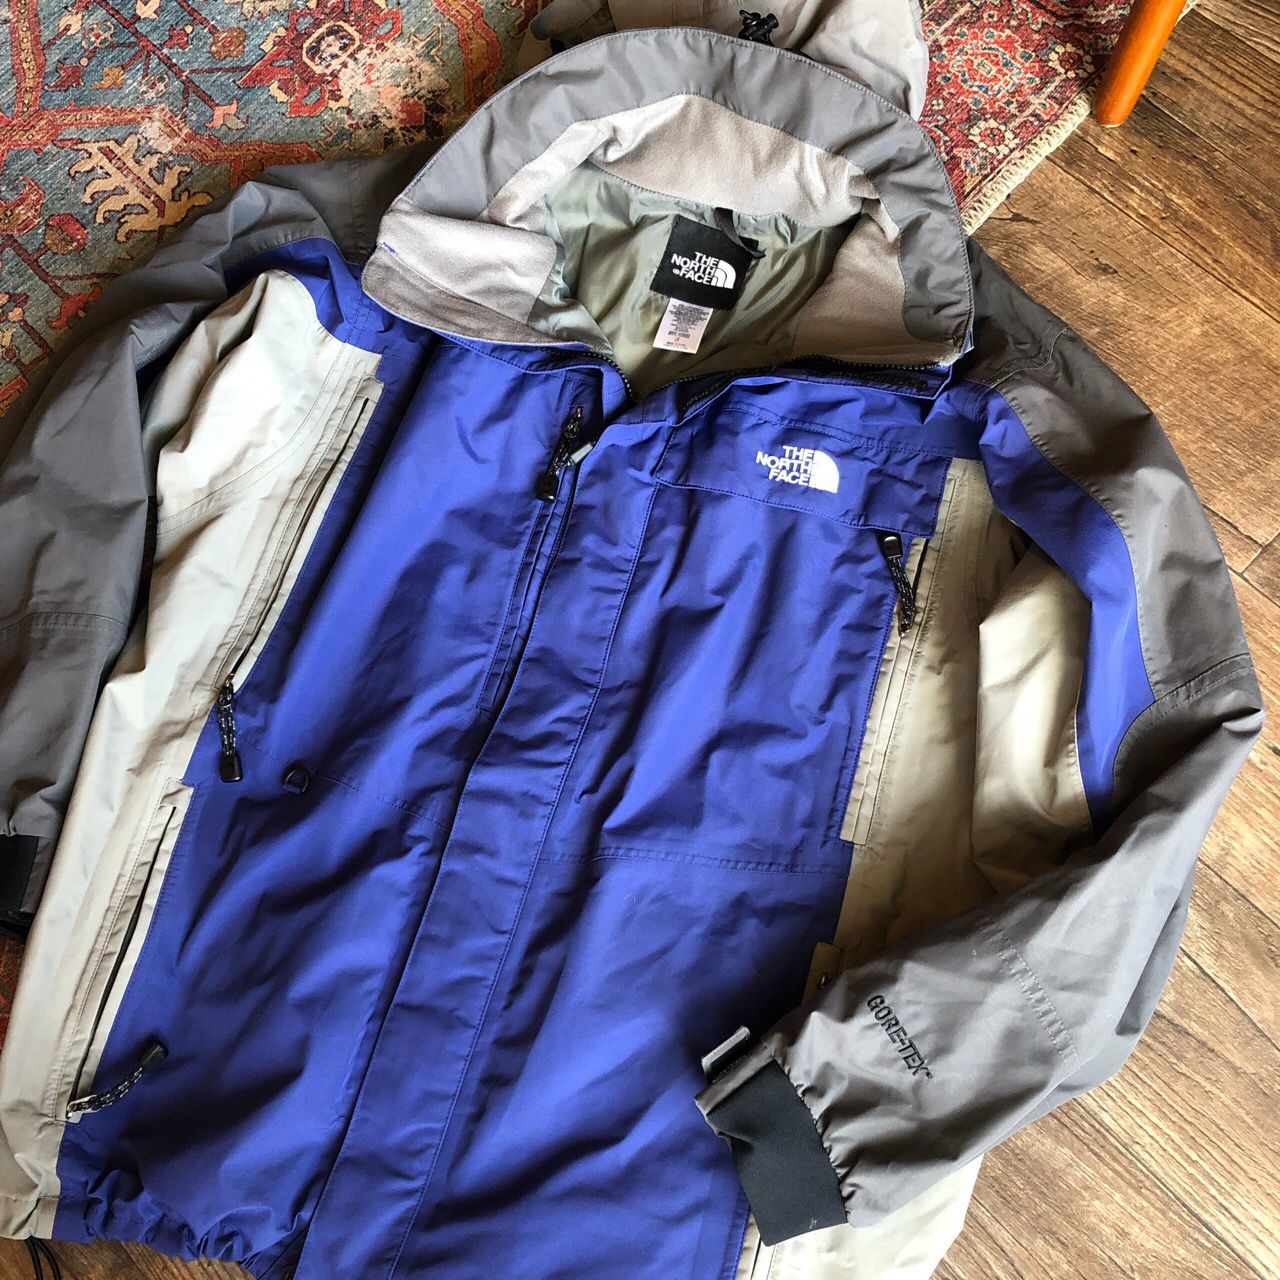 THE NORTH FACE GORE-TEX JACKET (MEN’S LARGE)